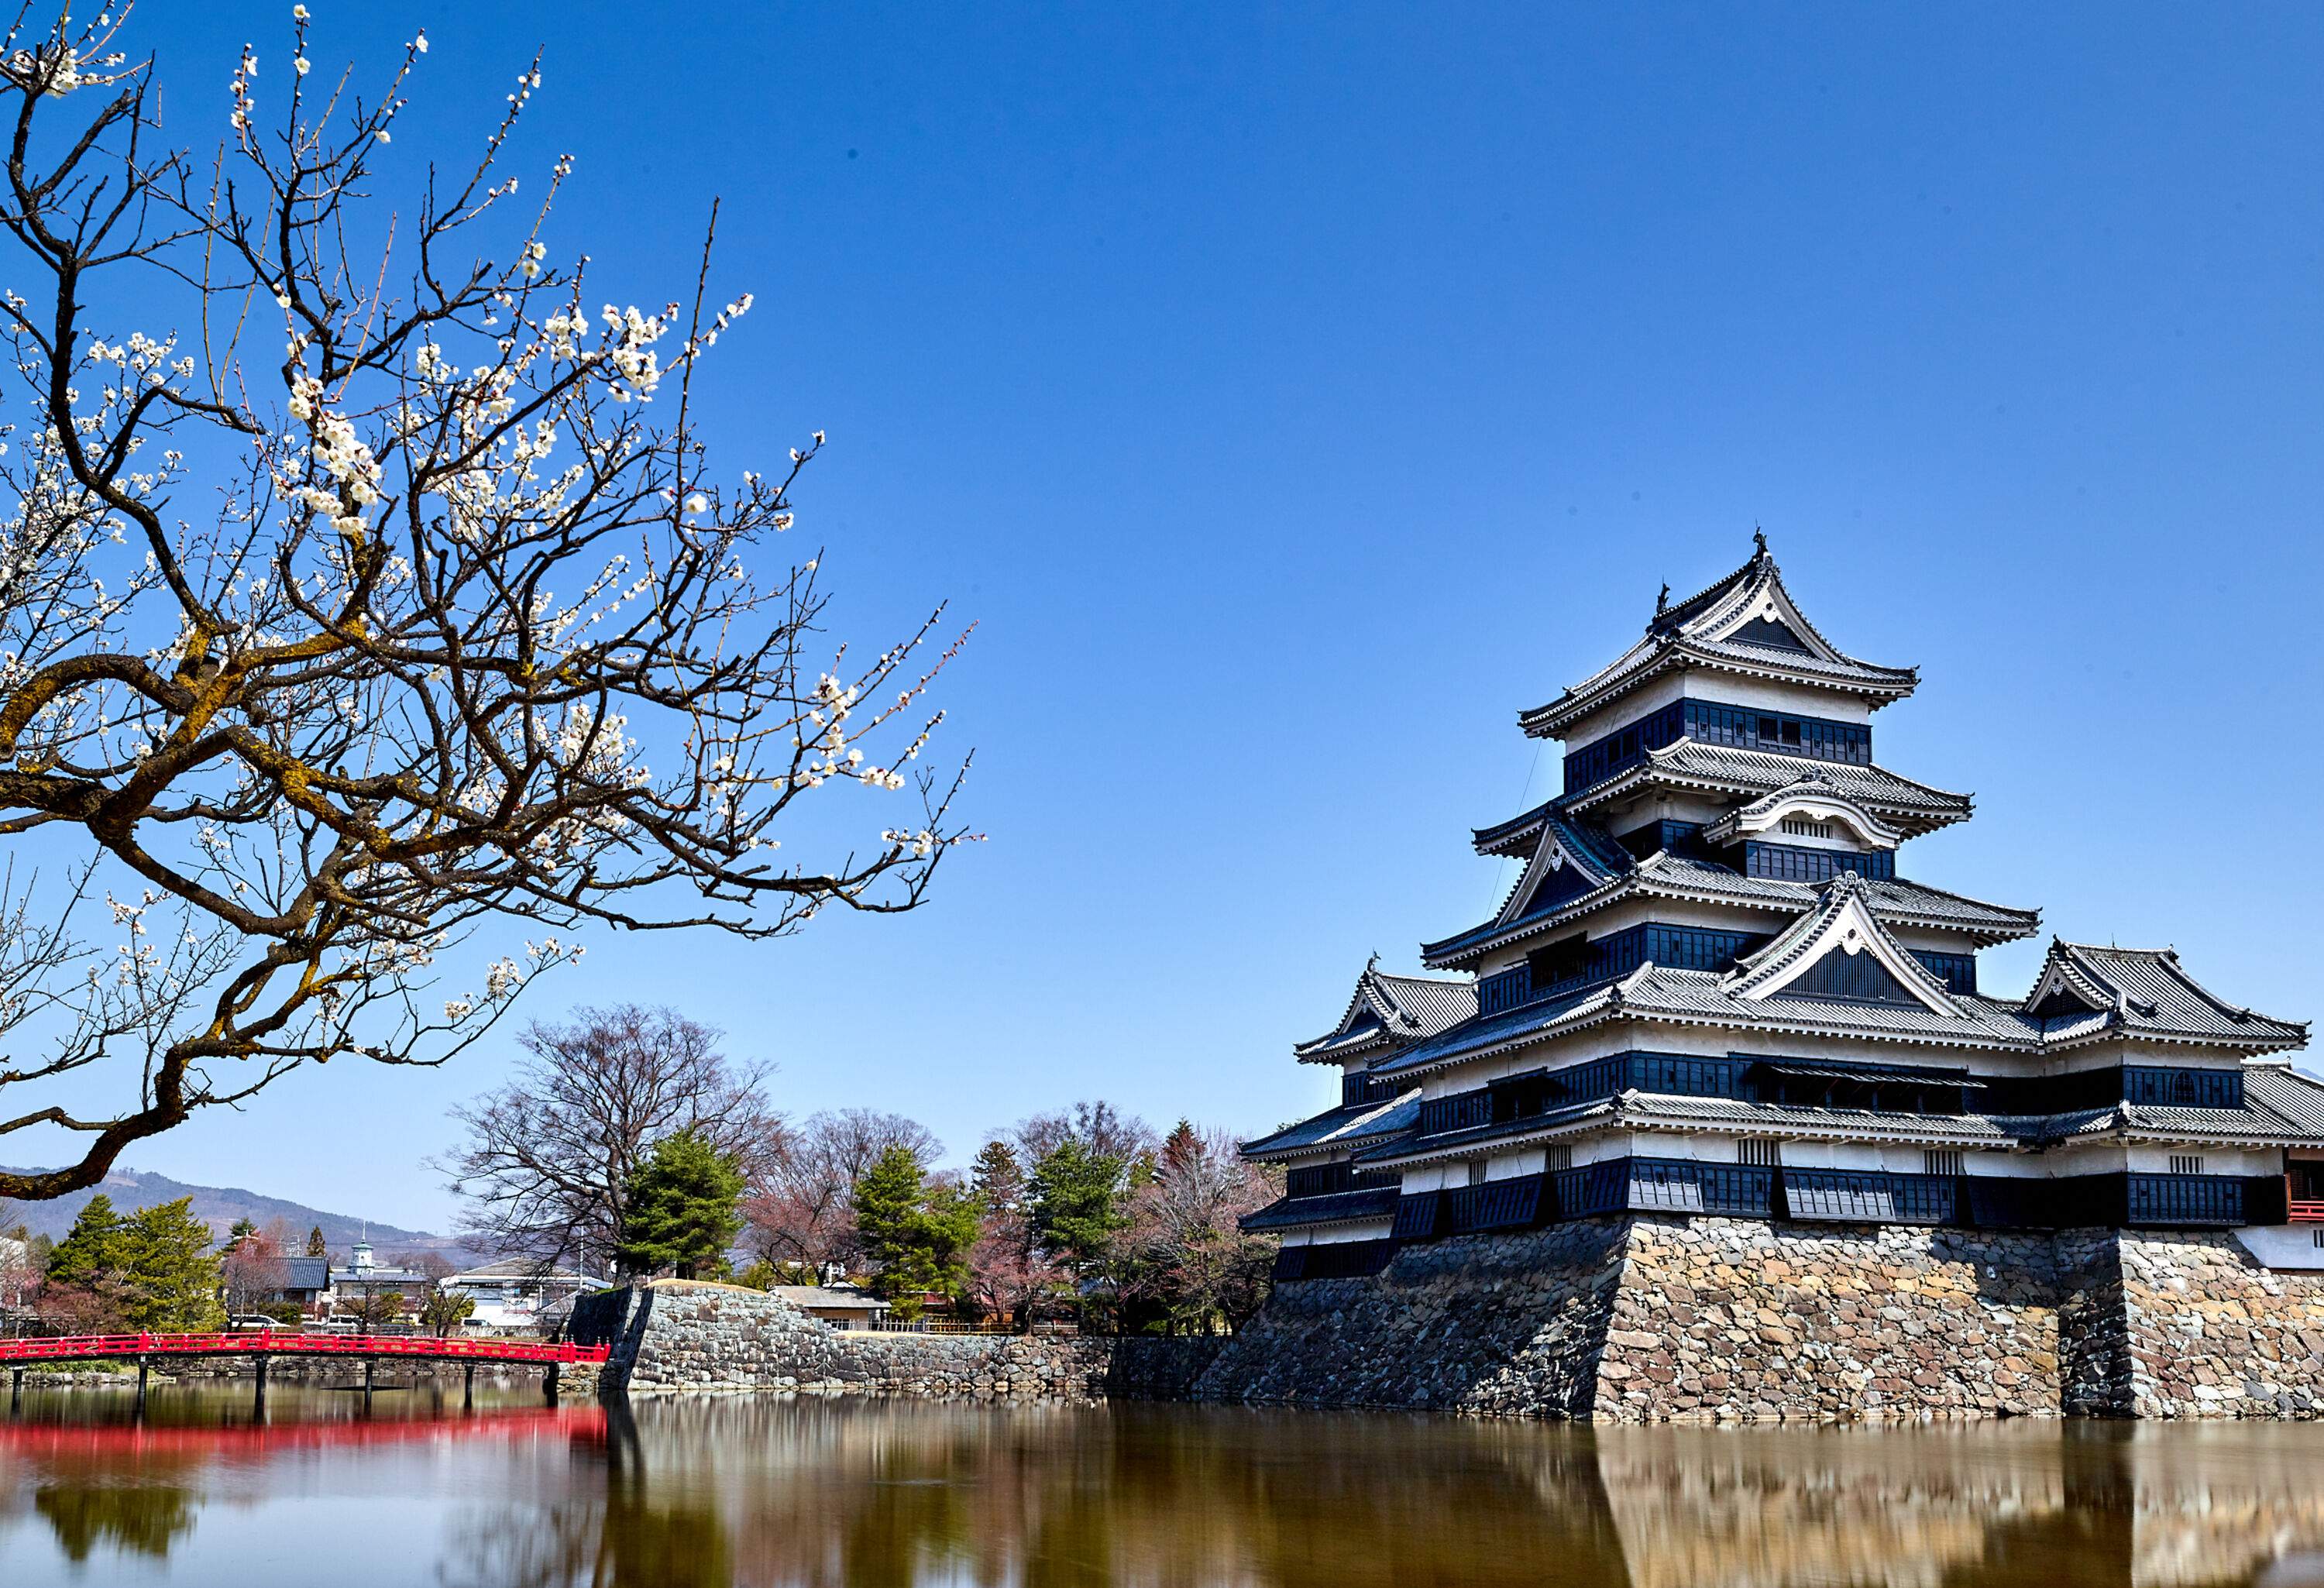 A historic black, moated castle with a wooden six-story keep by the river surrounded by green trees and cherry blossoms.